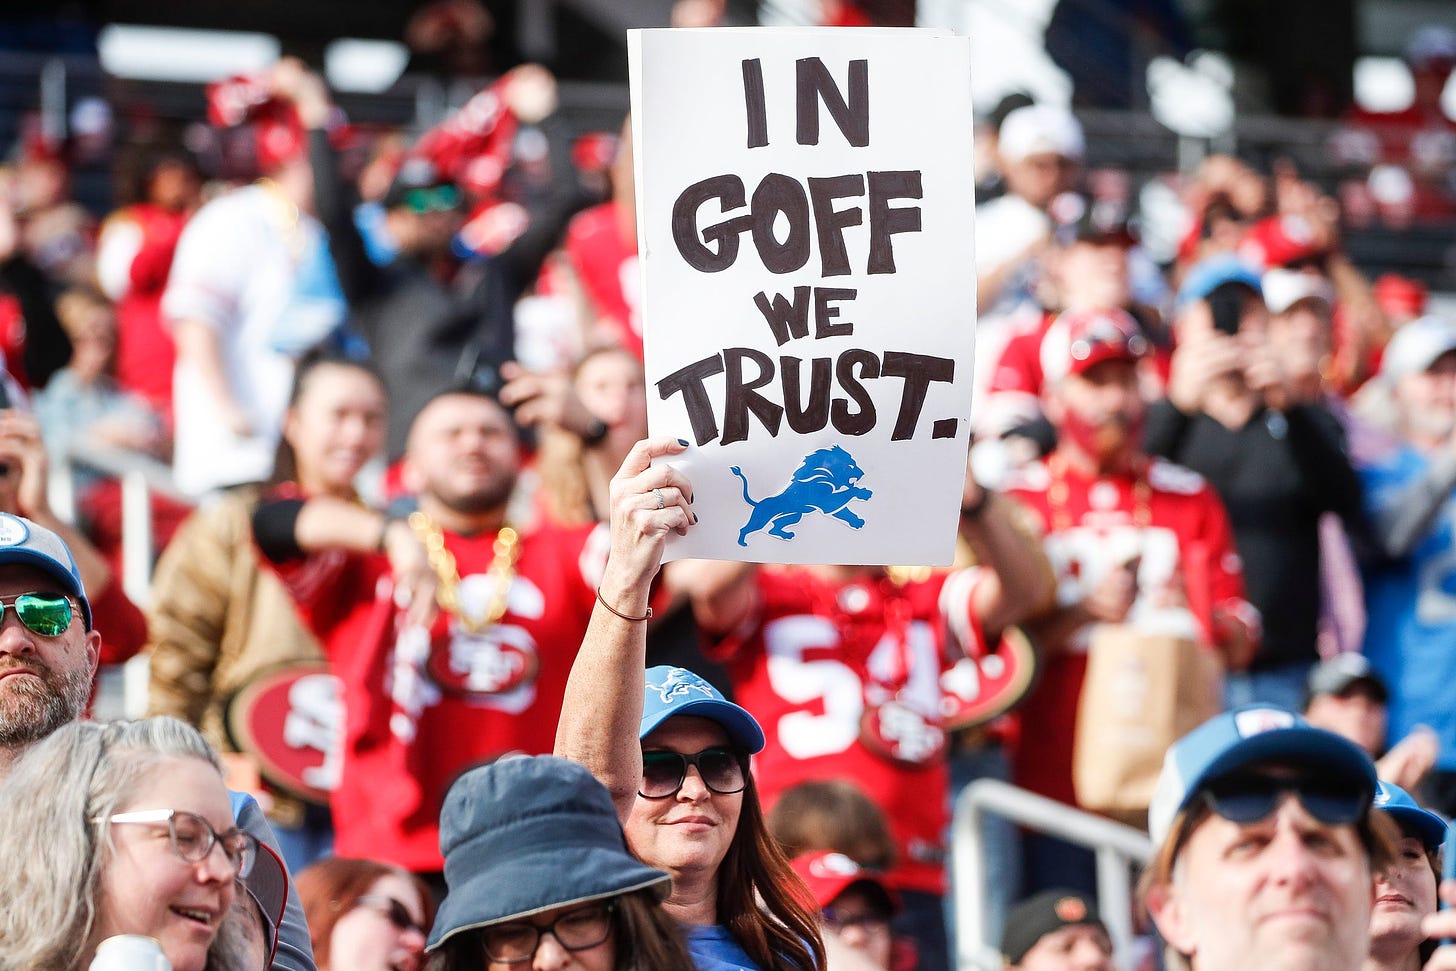 Inside stadium, Detroit Lions collapse leaves fans crushed, in tears